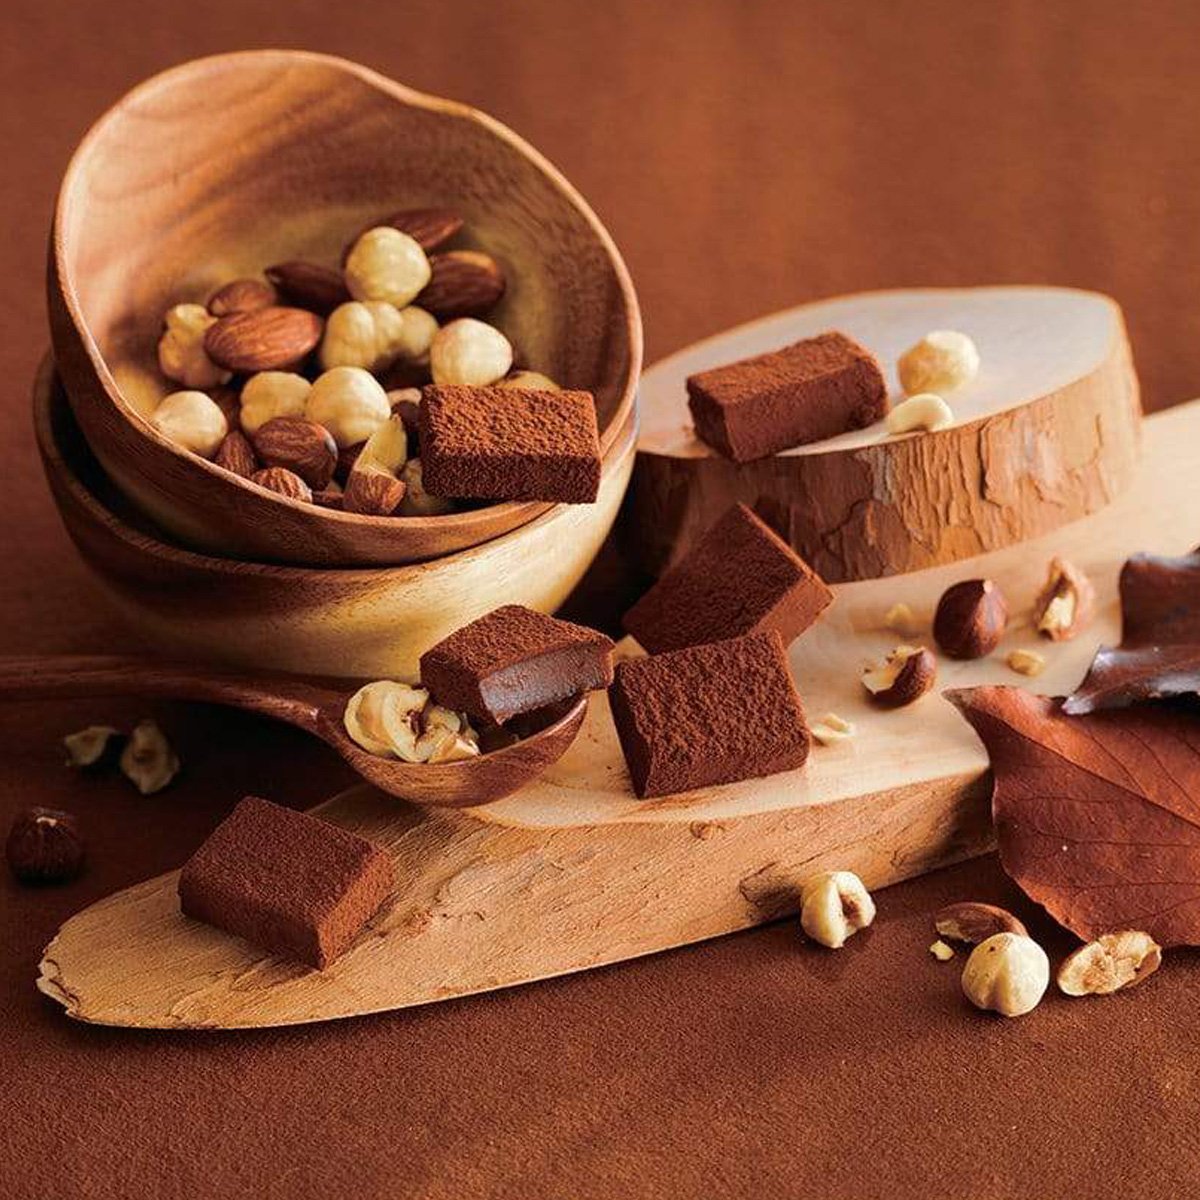 Image shows brown chocolate blocks with loose mixed nuts. Accents include brown wooden bowls and trays together with a brown wooden spoon and some brown leaves. Background surface is in bright brown.